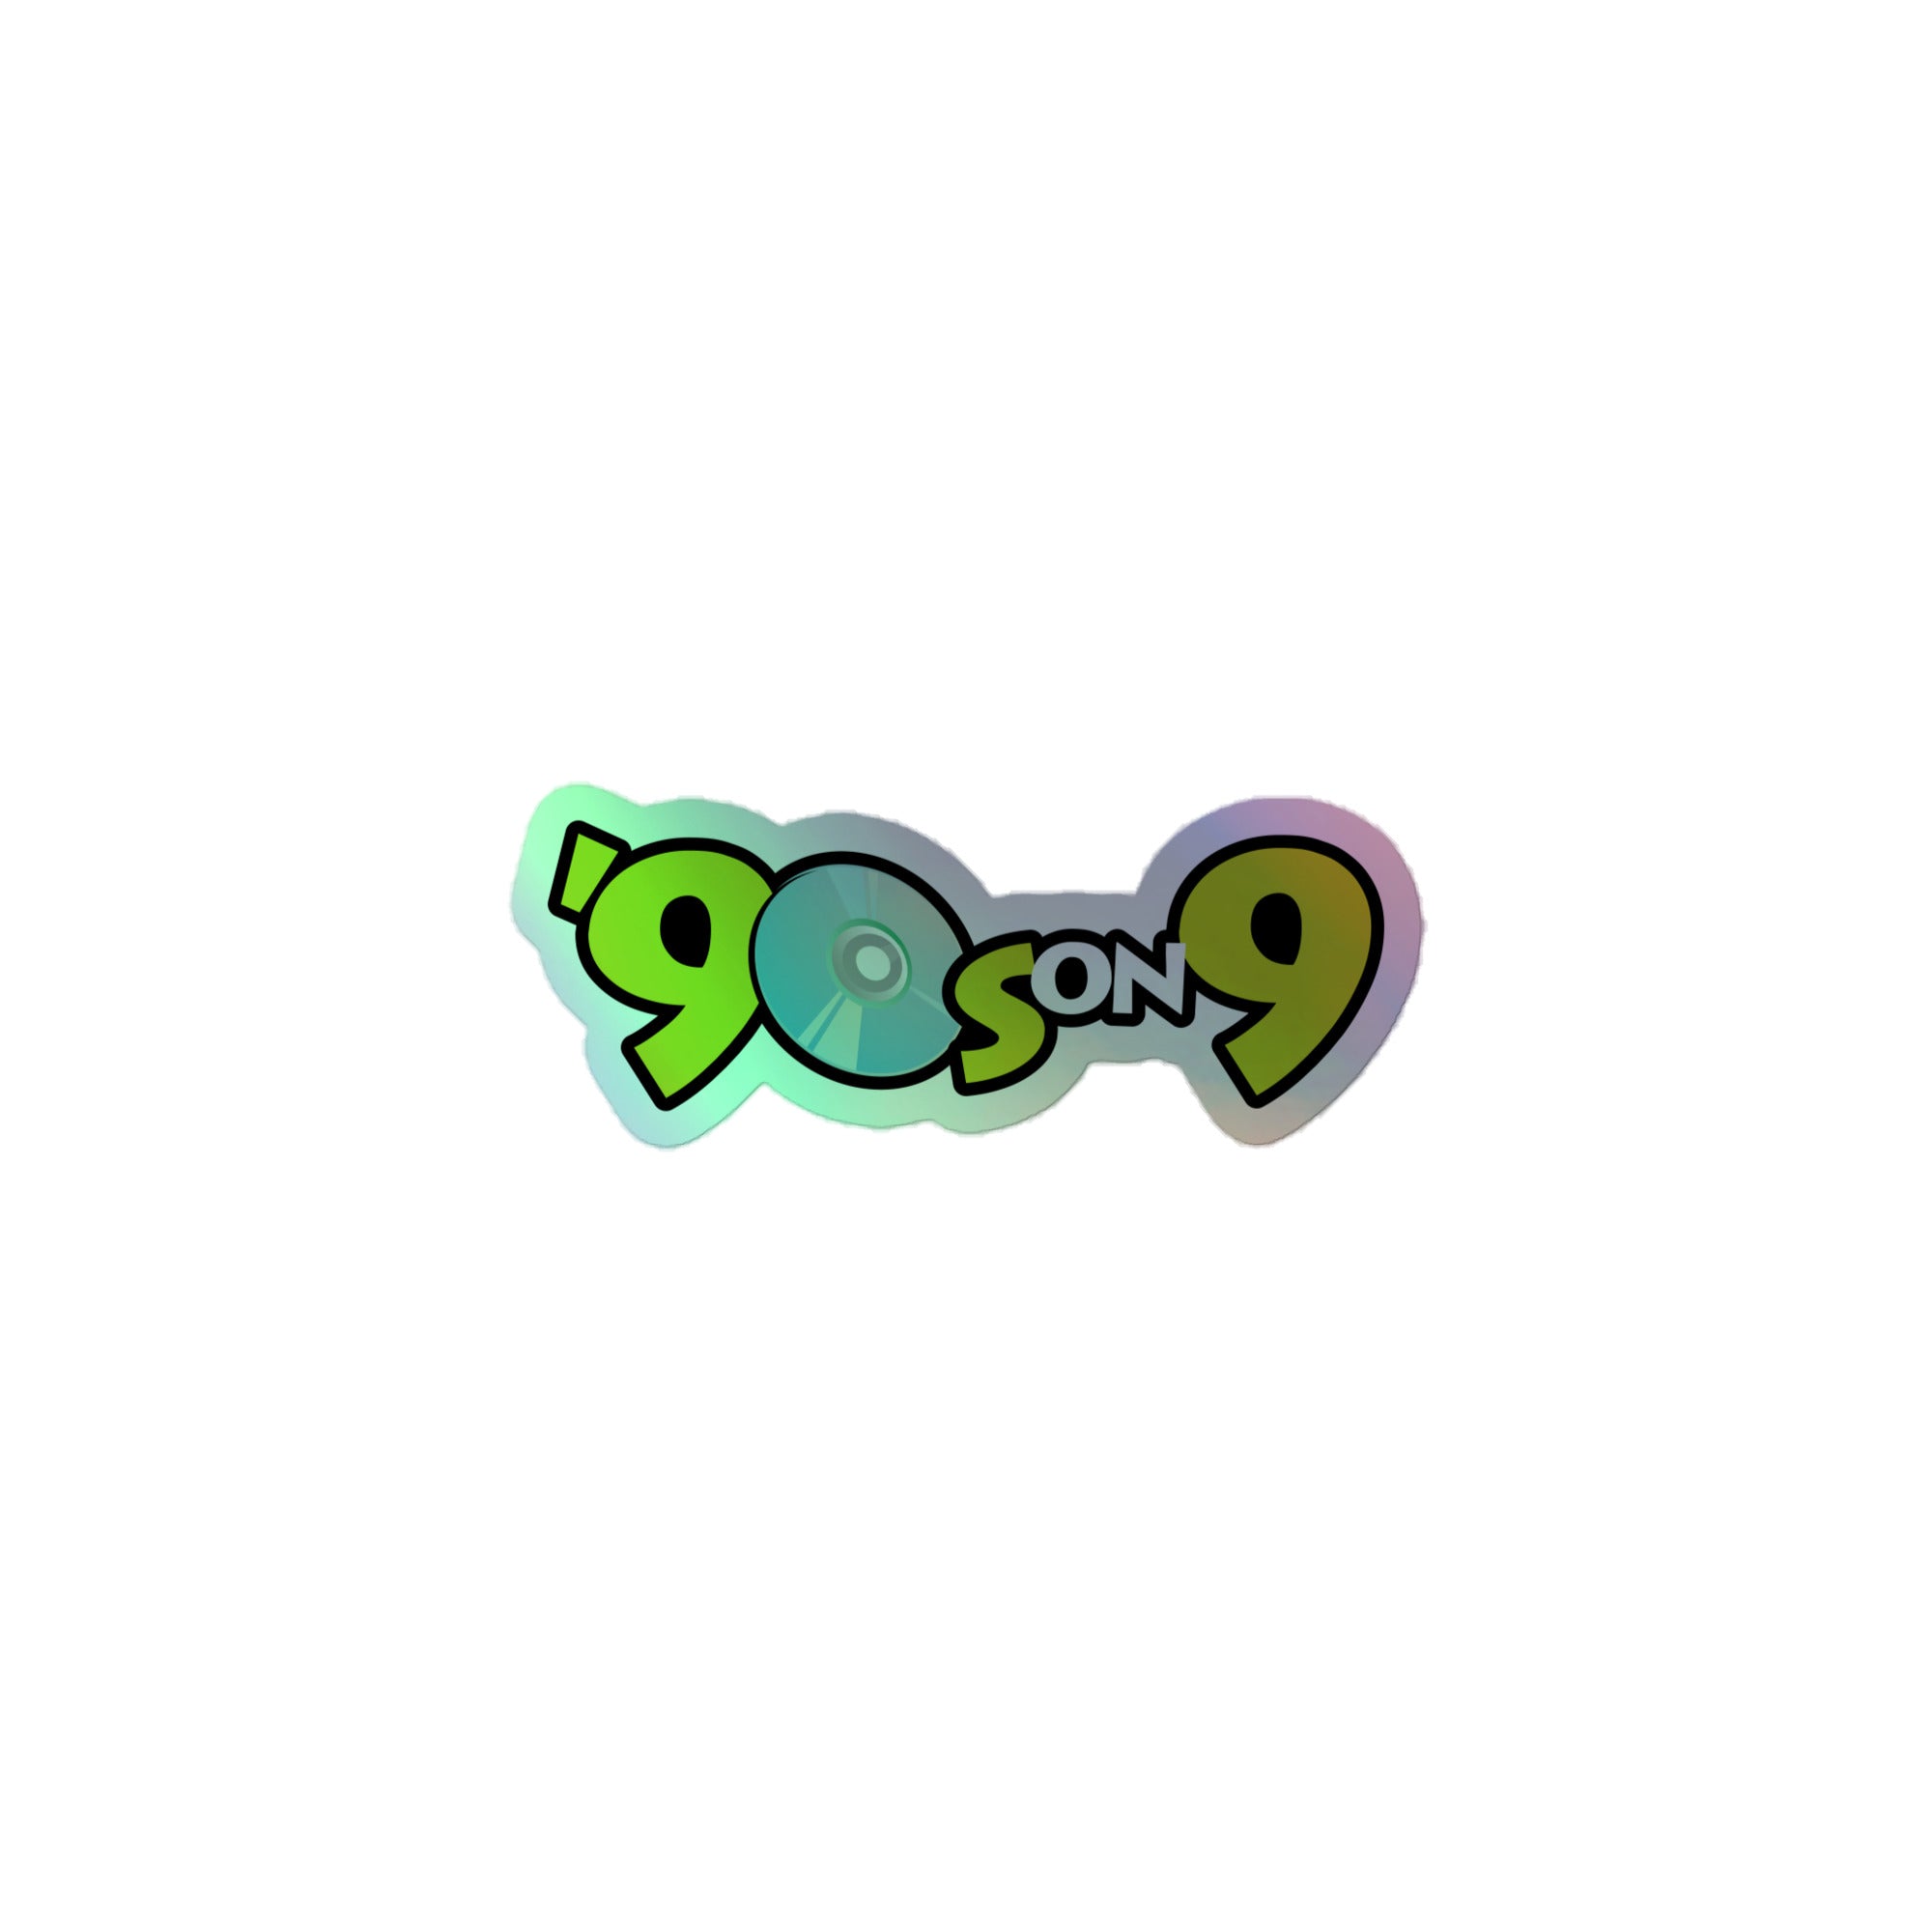 90s on 9: Holographic Sticker